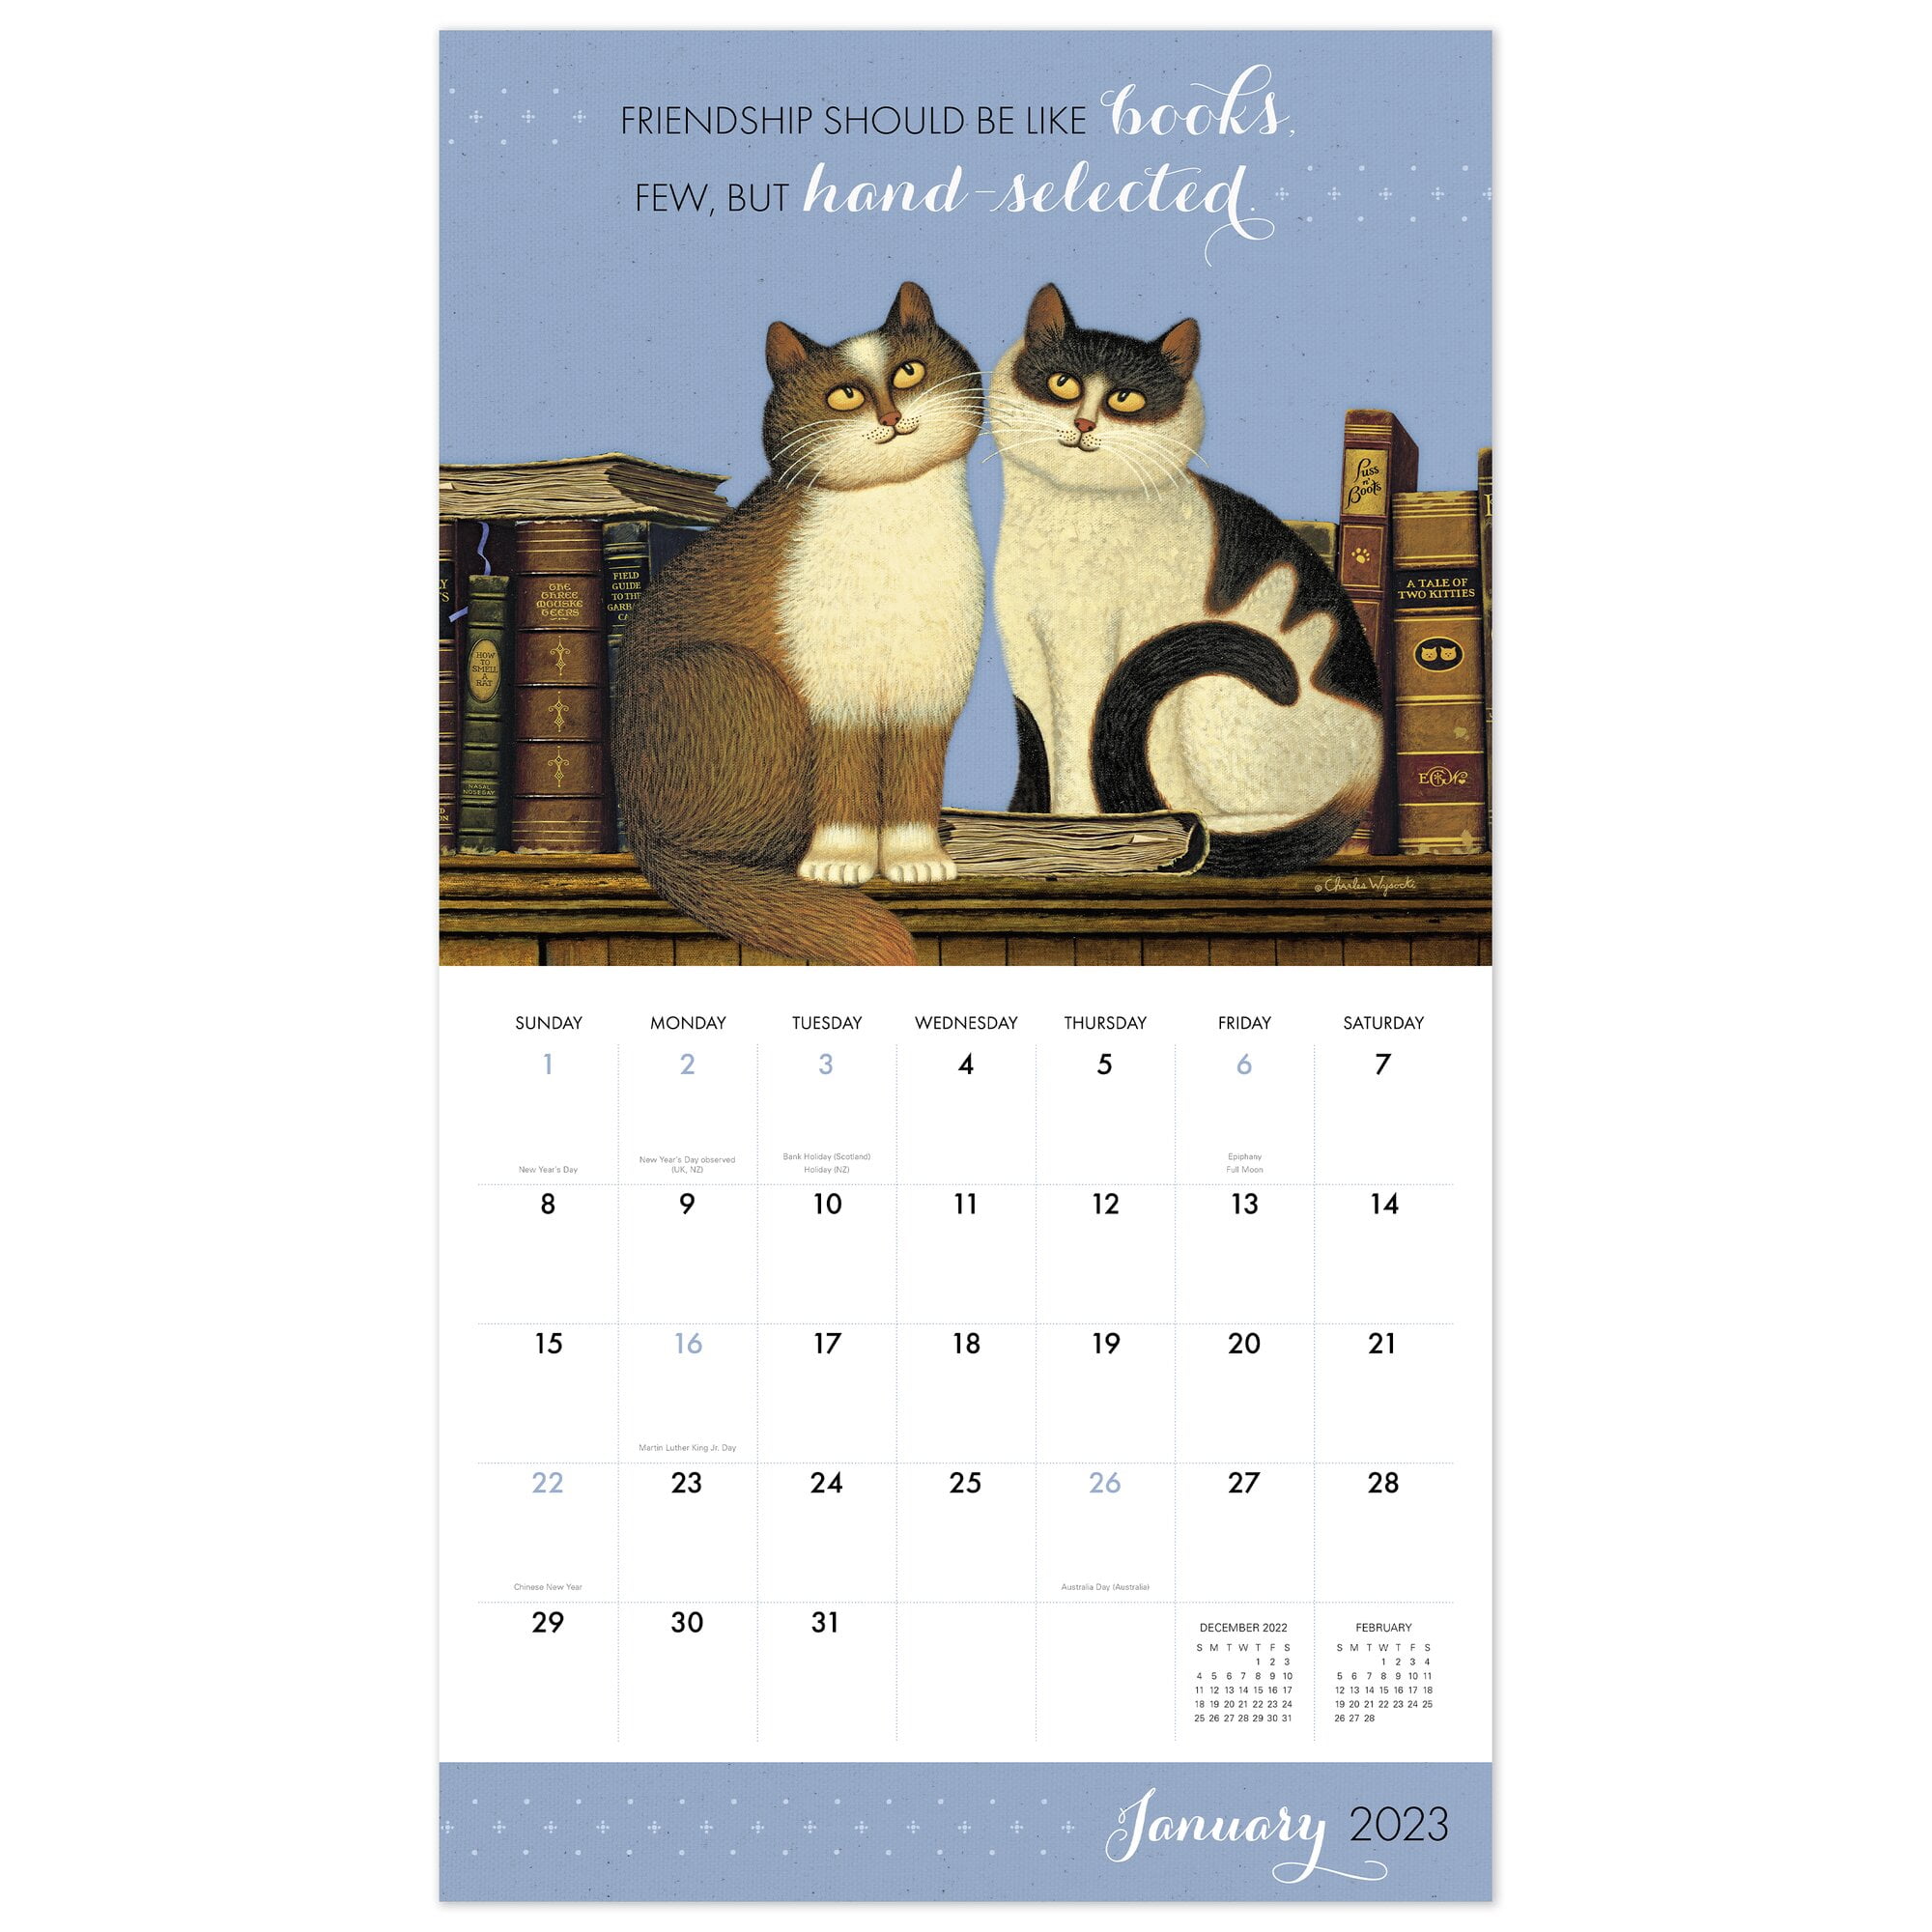 2023 Wall Calendar 13 Pages 8x12 Secret Life of Cats by Louis Wa